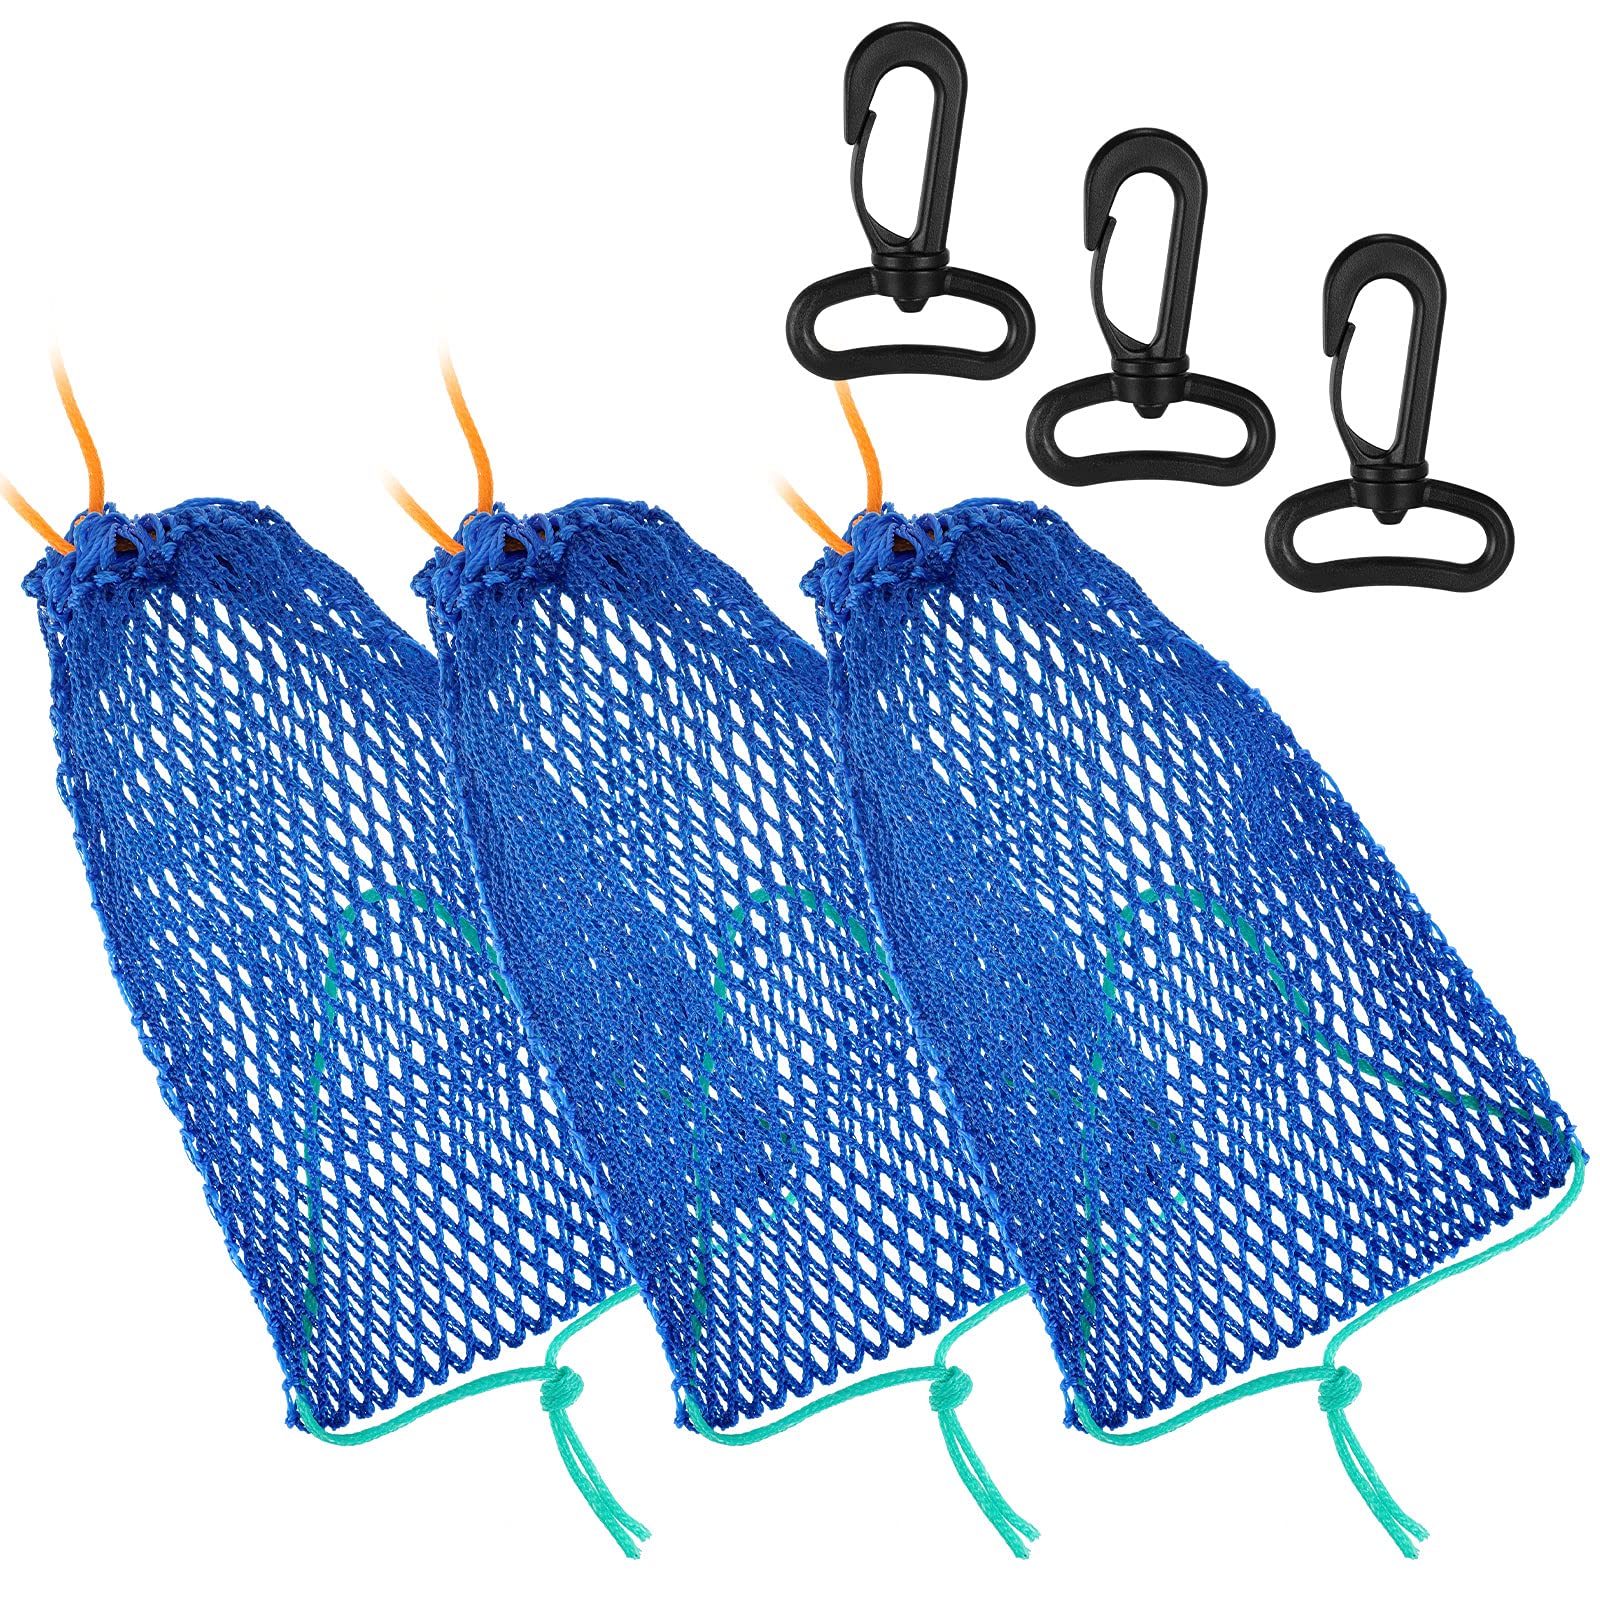 3 Pieces Crab Trap Bait Bags Outdoor Sports Style with 3 Pieces